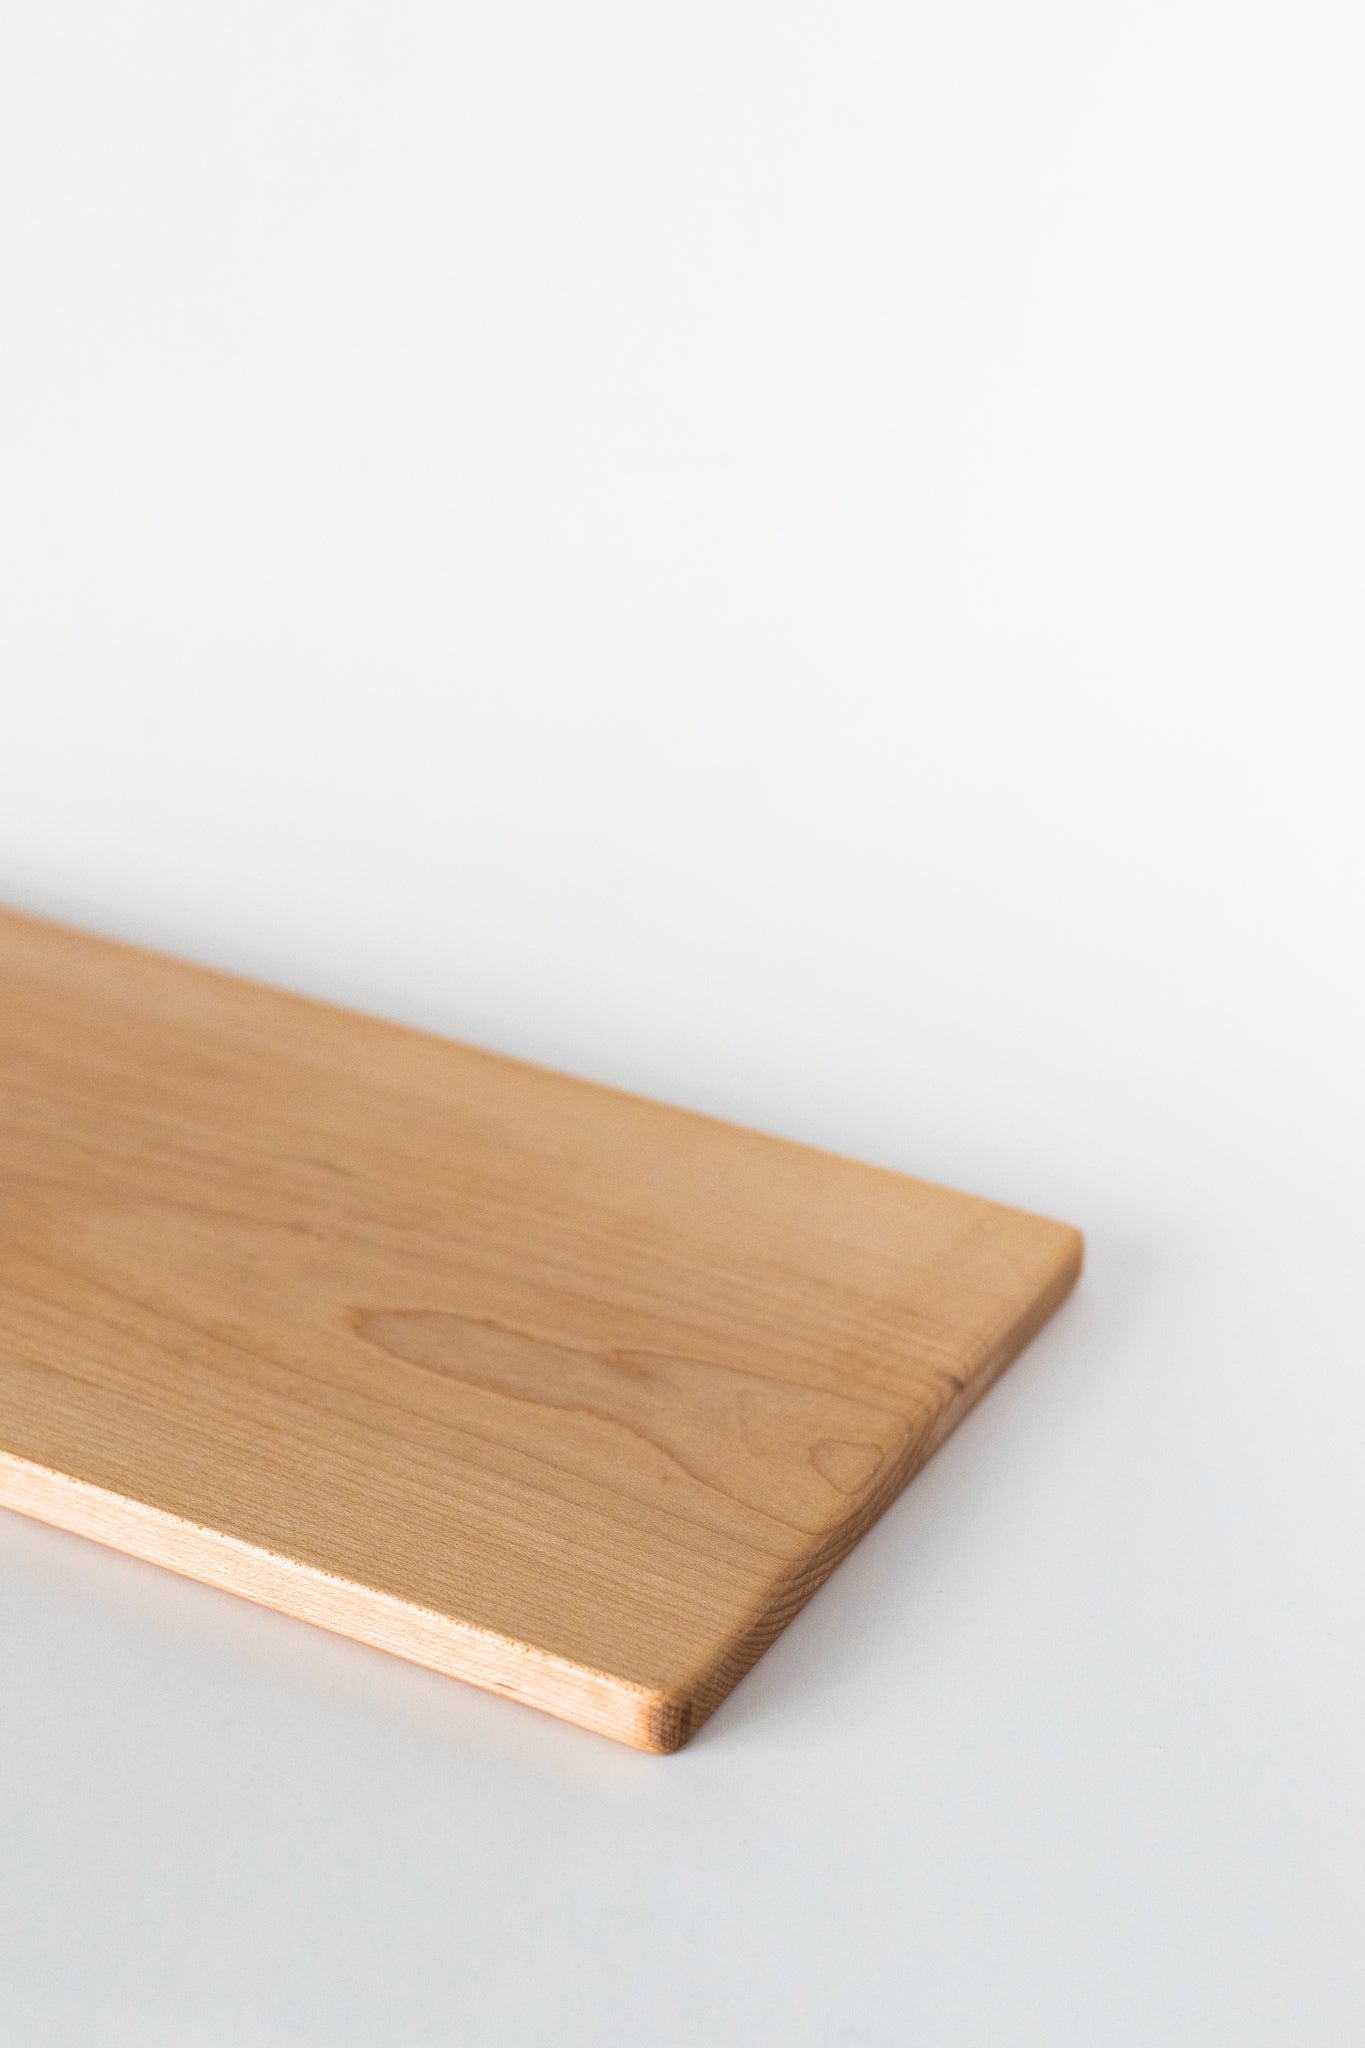 Vermont Hard Maple Charcuterie Board, Carrying Handle